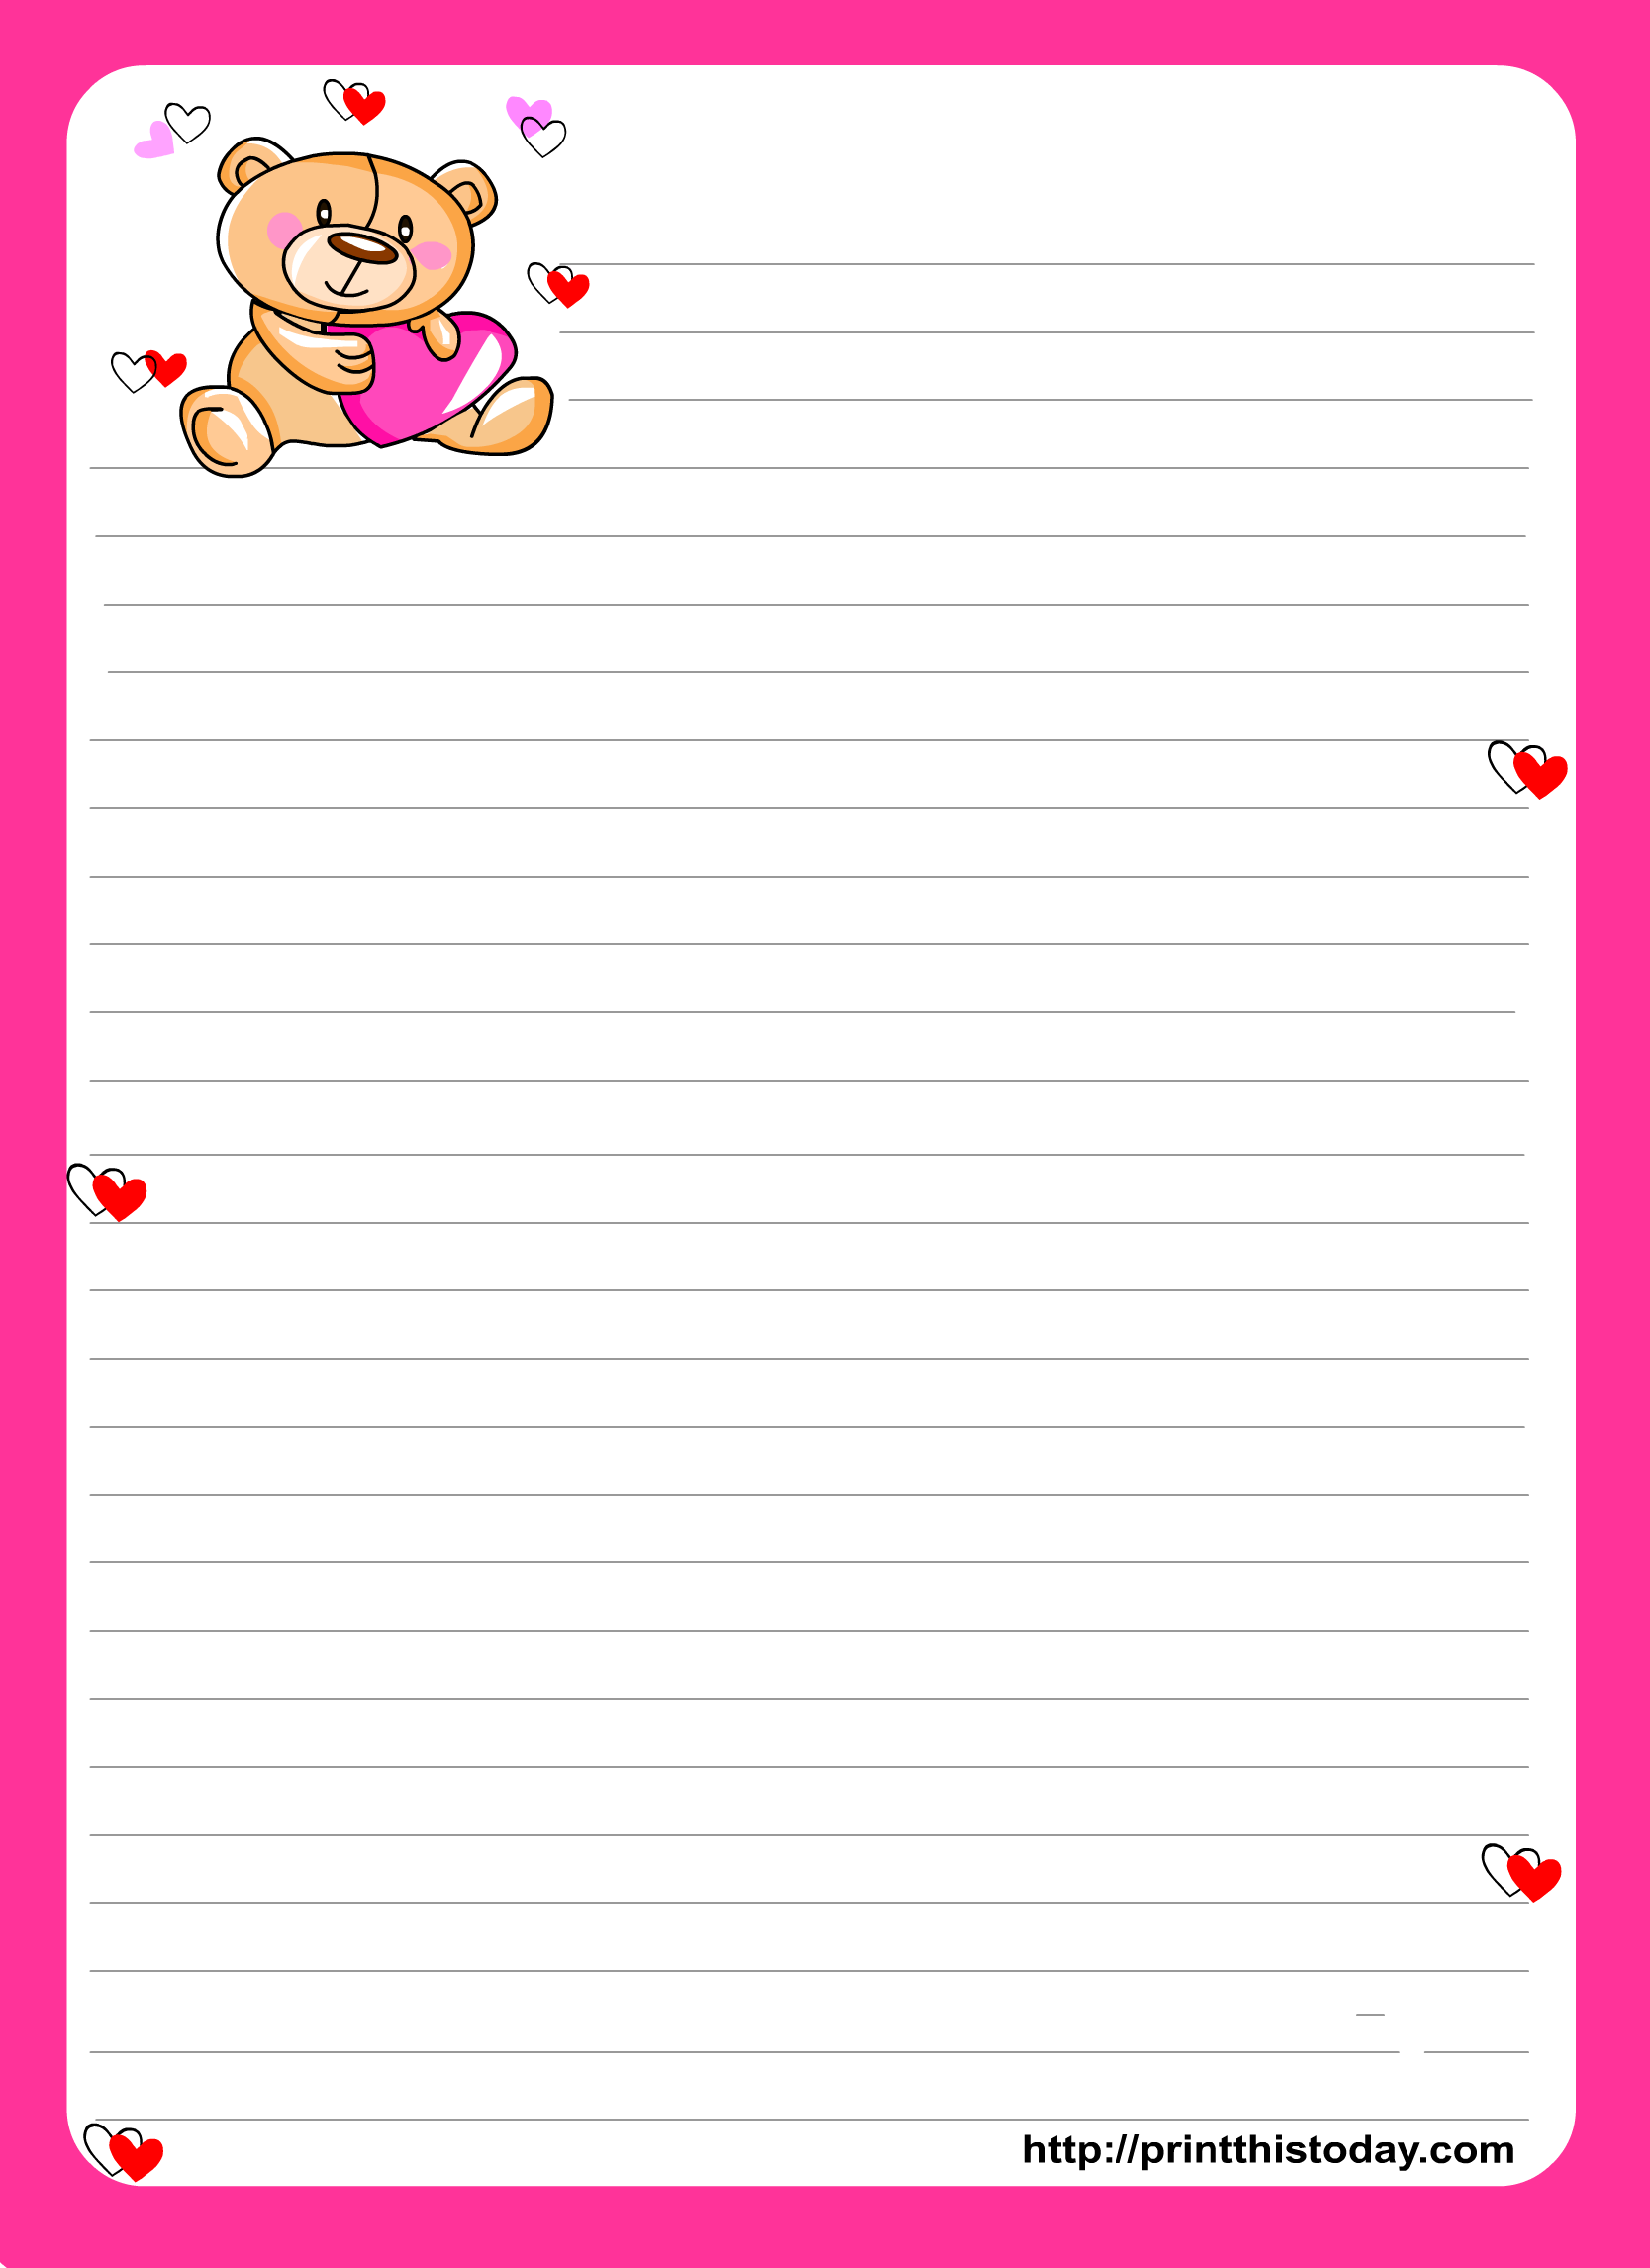 7-best-images-of-printable-lined-paper-with-design-free-printable-letter-writing-paper